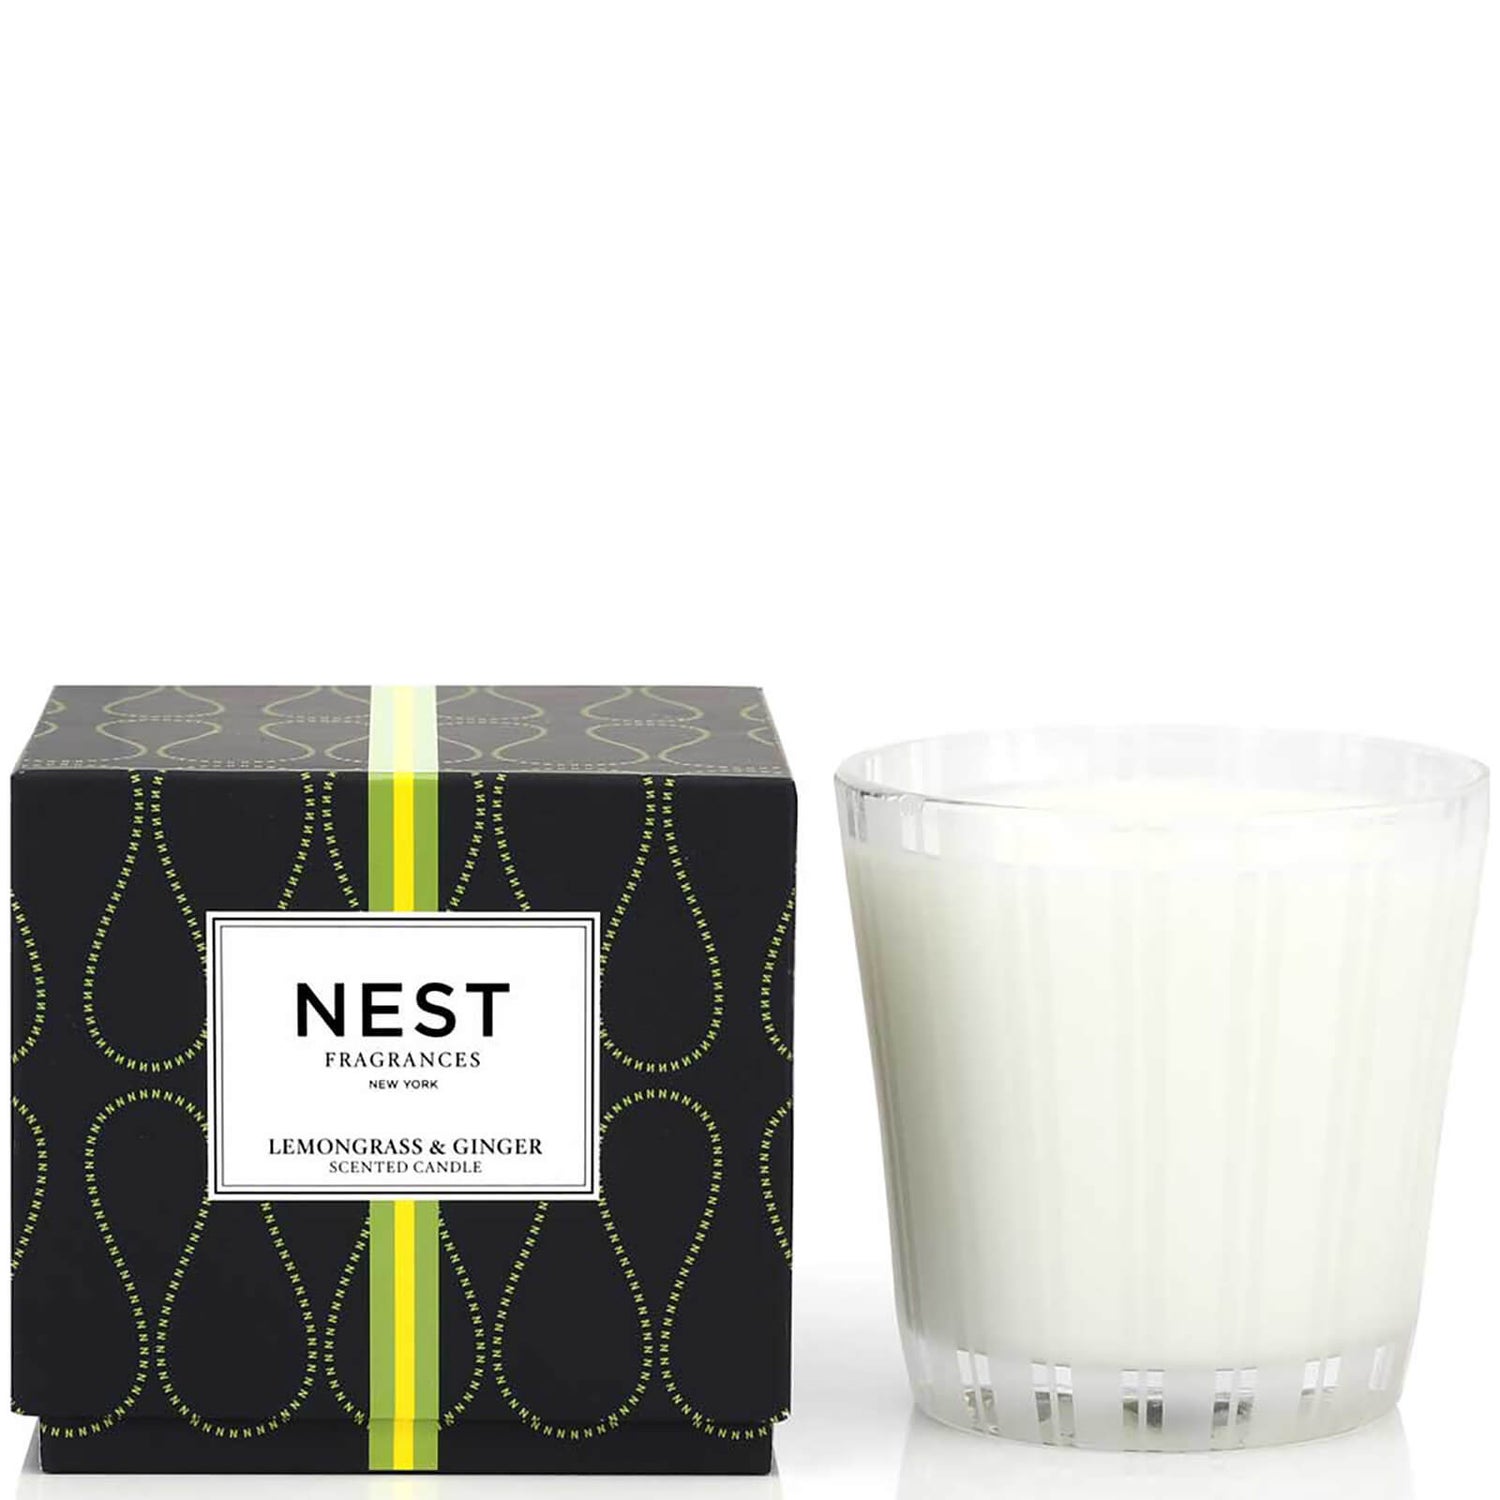 NEST Fragrances Lemongrass and Ginger 3-Wick Candle